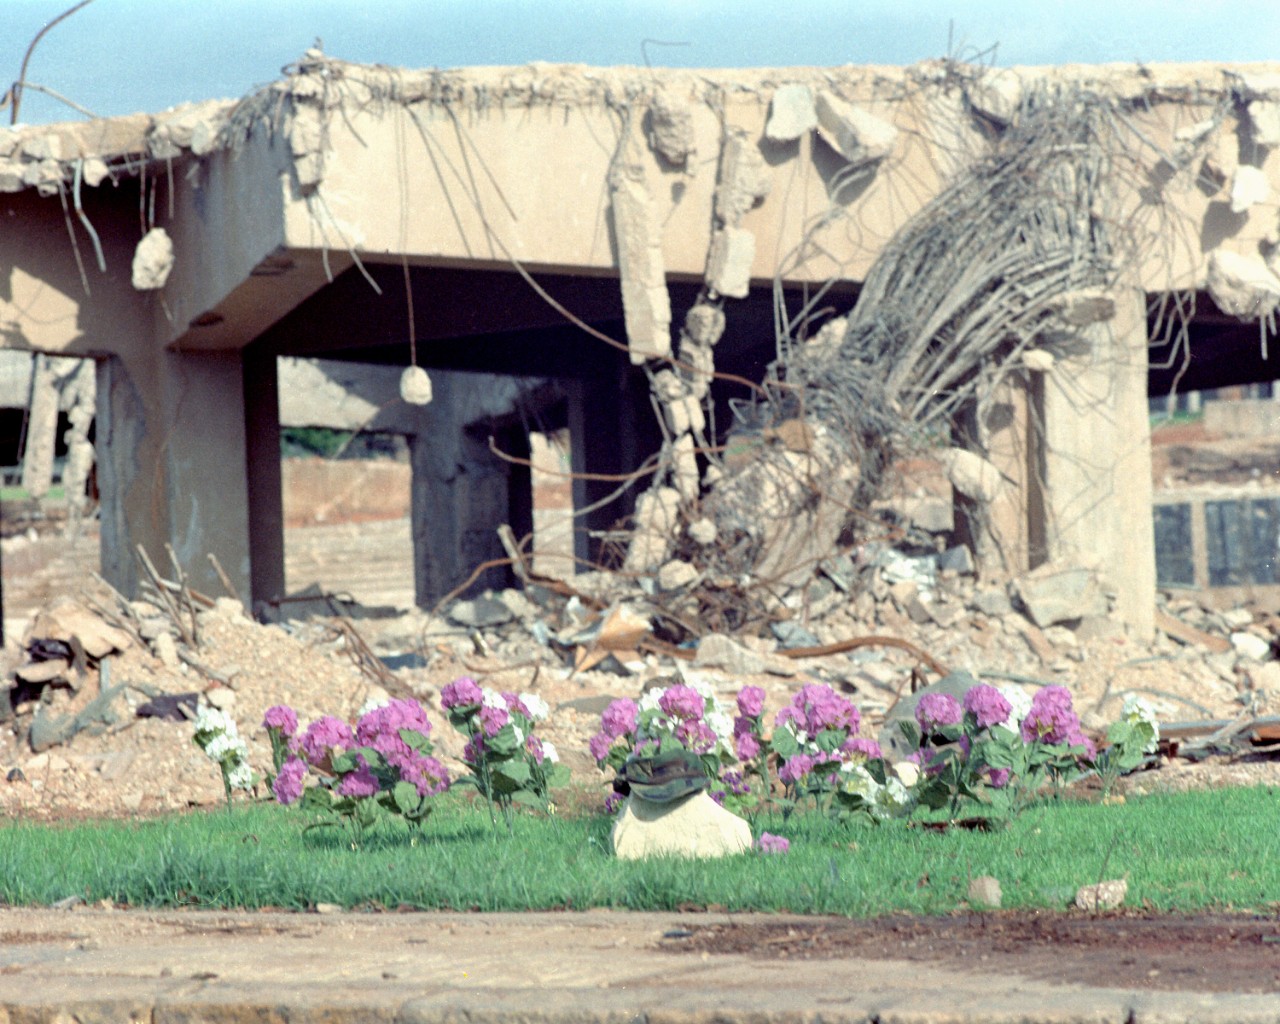 The bombed remains of the U.S. Marine barracks at Beirut International Airport